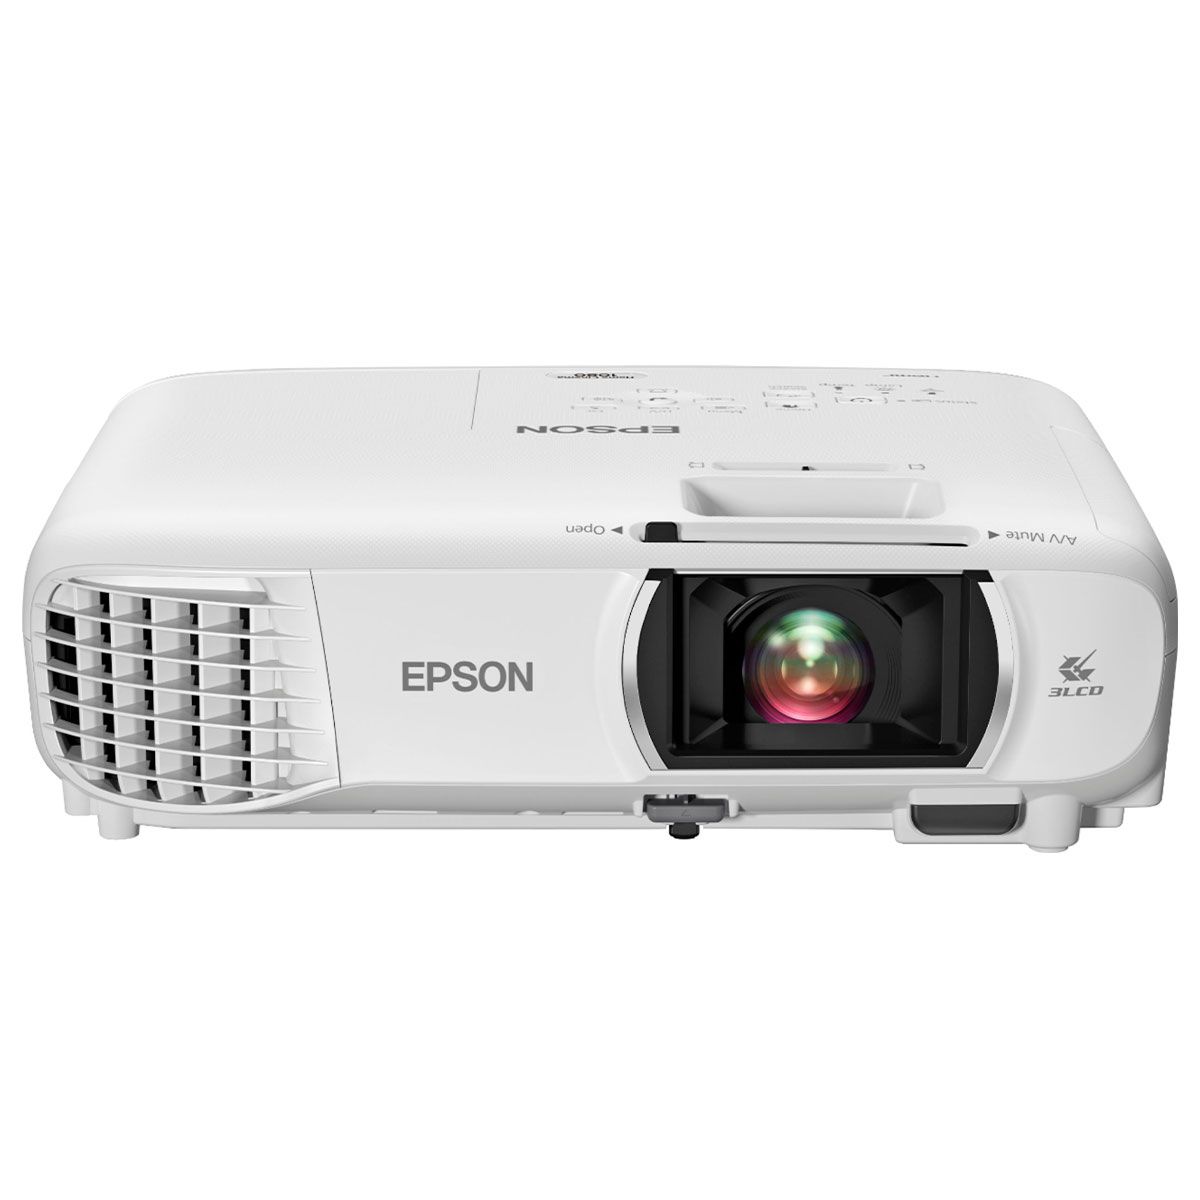 Epson 1080 Projector front top view